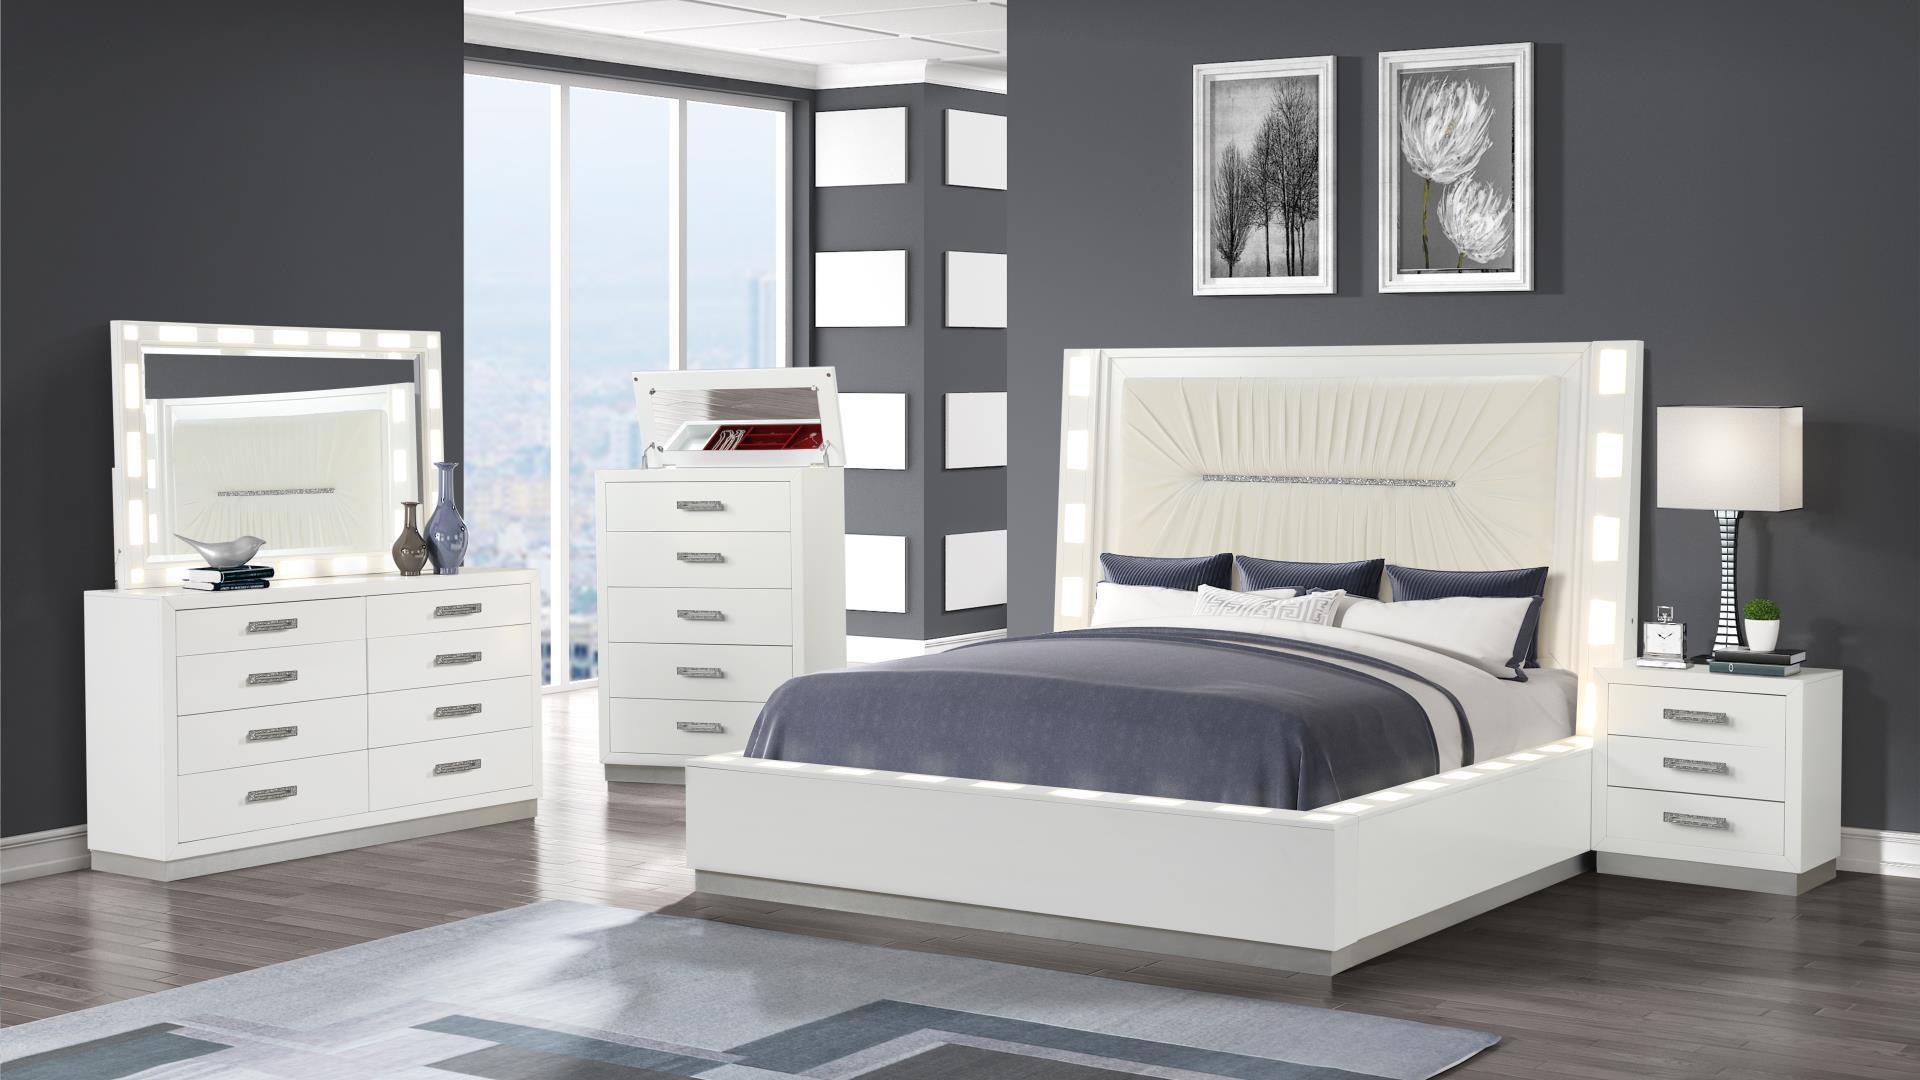 Contemporary, Modern Platform Bedroom Set COCO-Q-BED-NDM-4PC COCO-Q-BED-NDM-4PC in White 